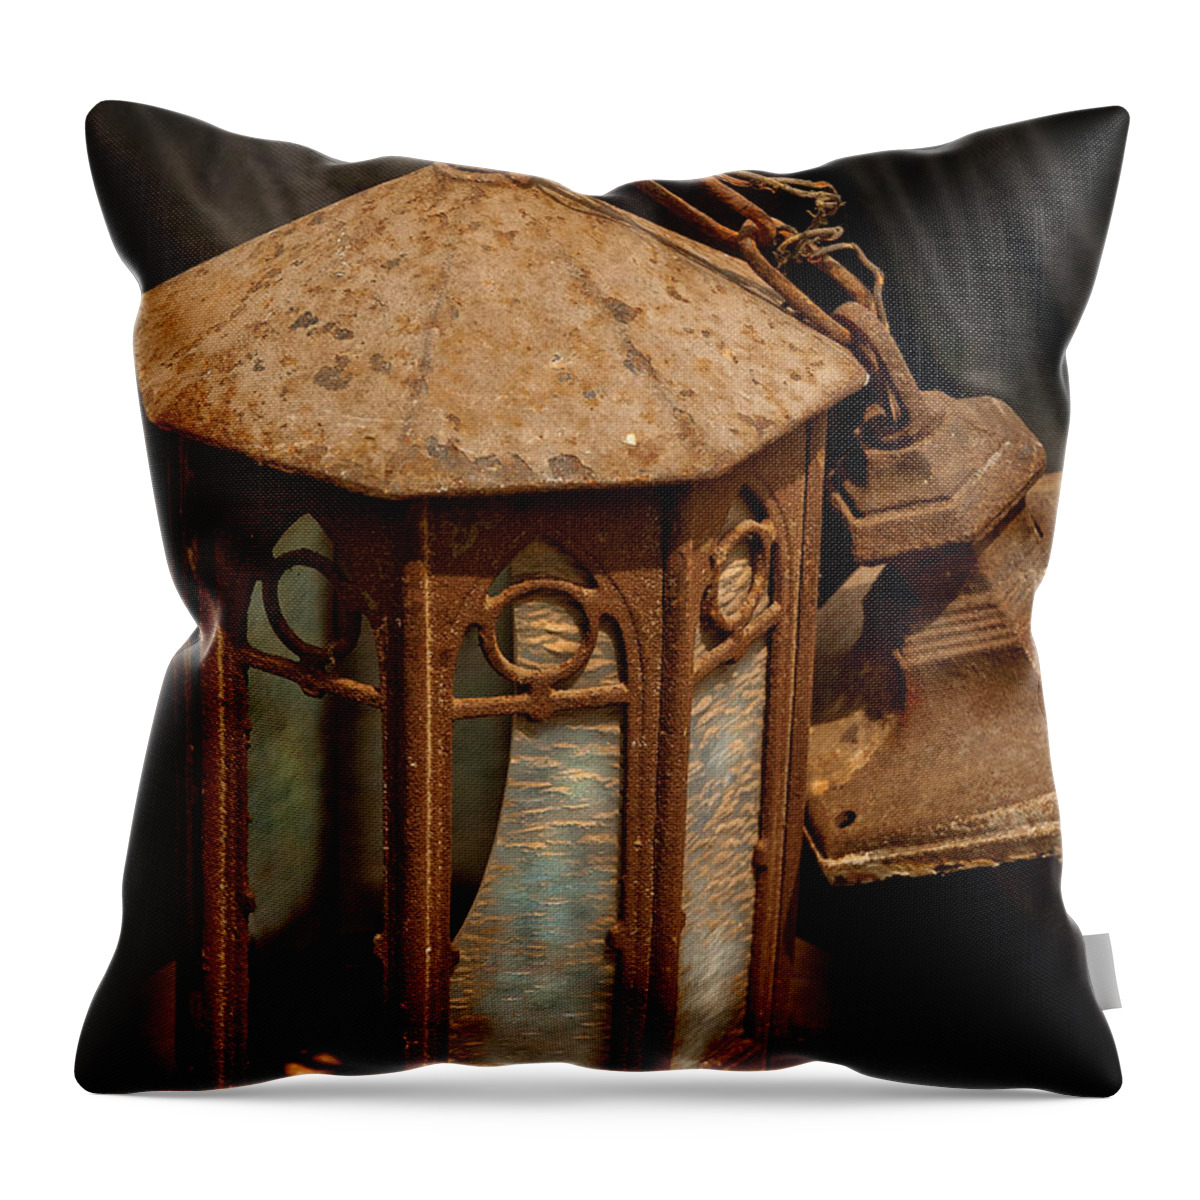 Antique Throw Pillow featuring the photograph Antique Entry Light Of Historic Church by Lena Wilhite